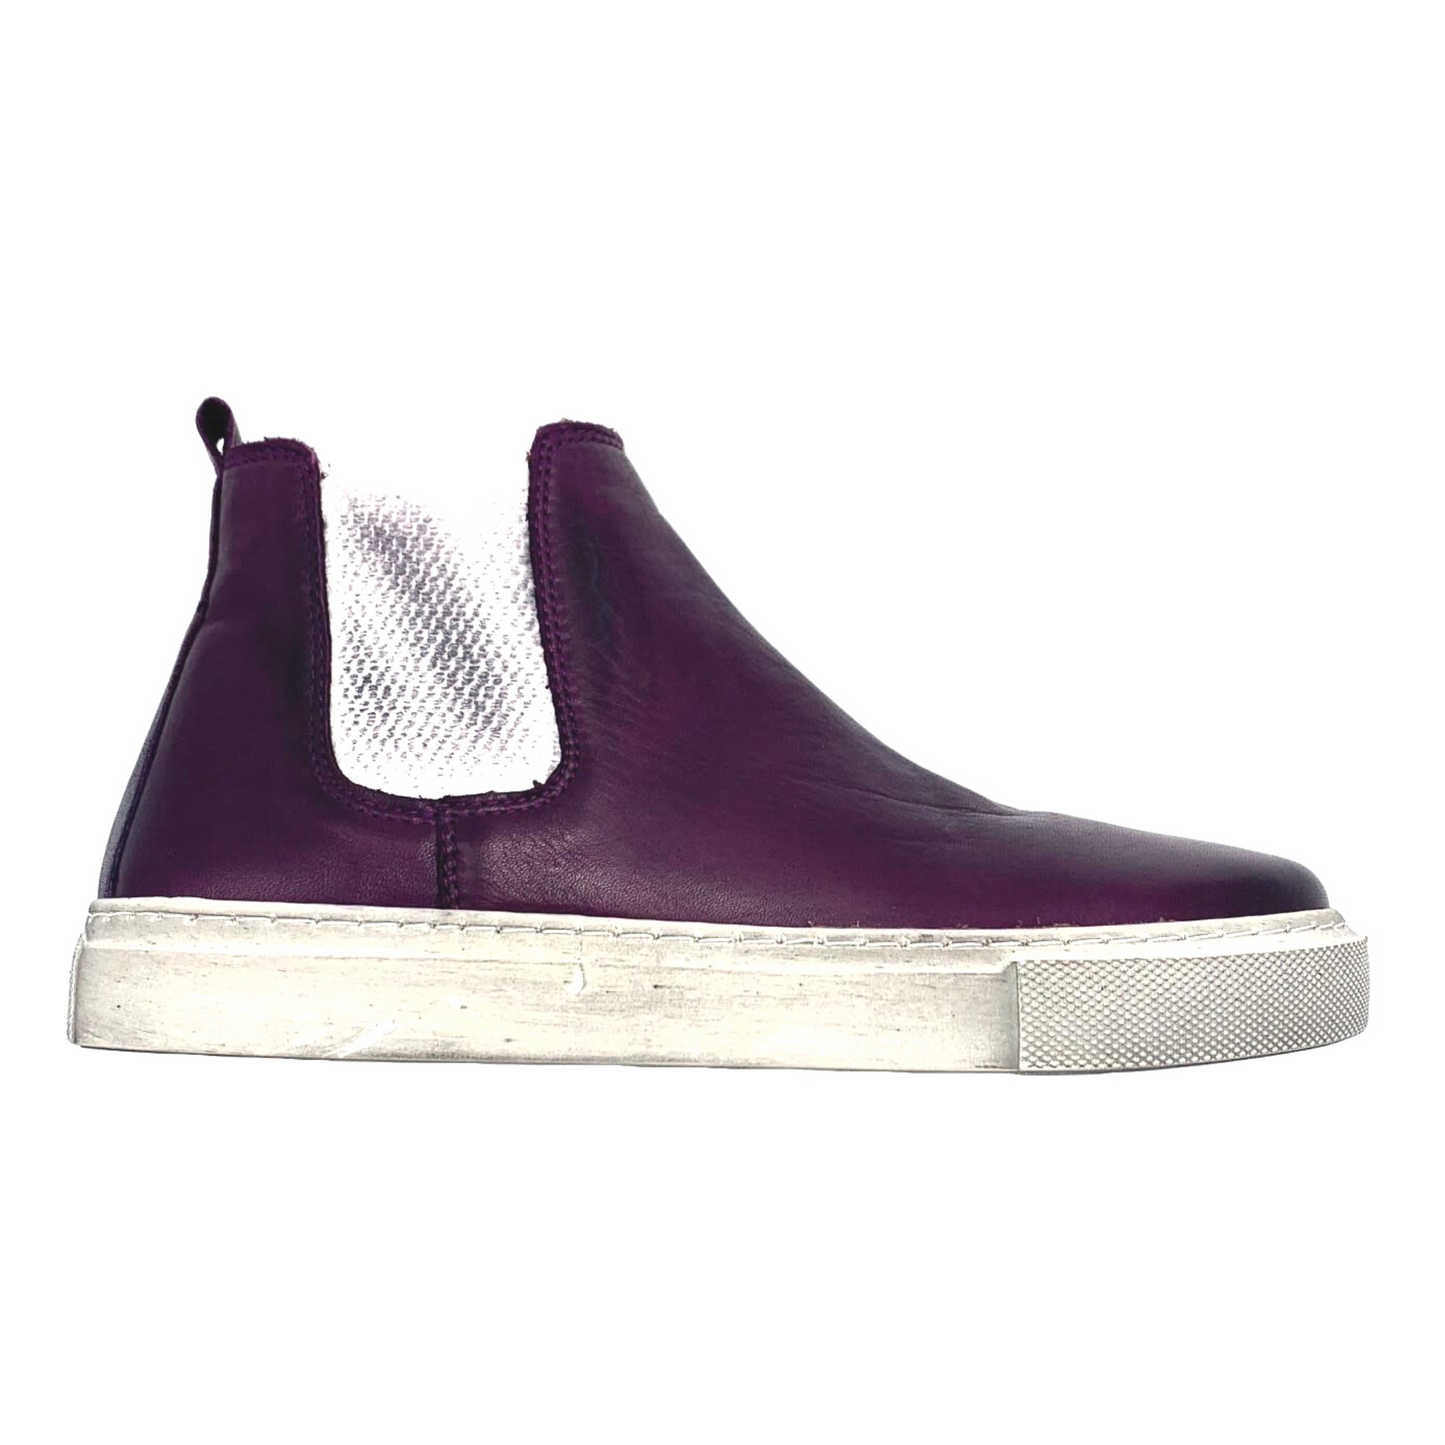 A deep purple leather boot style sneaker features white elastic ankles and an off-white sole.